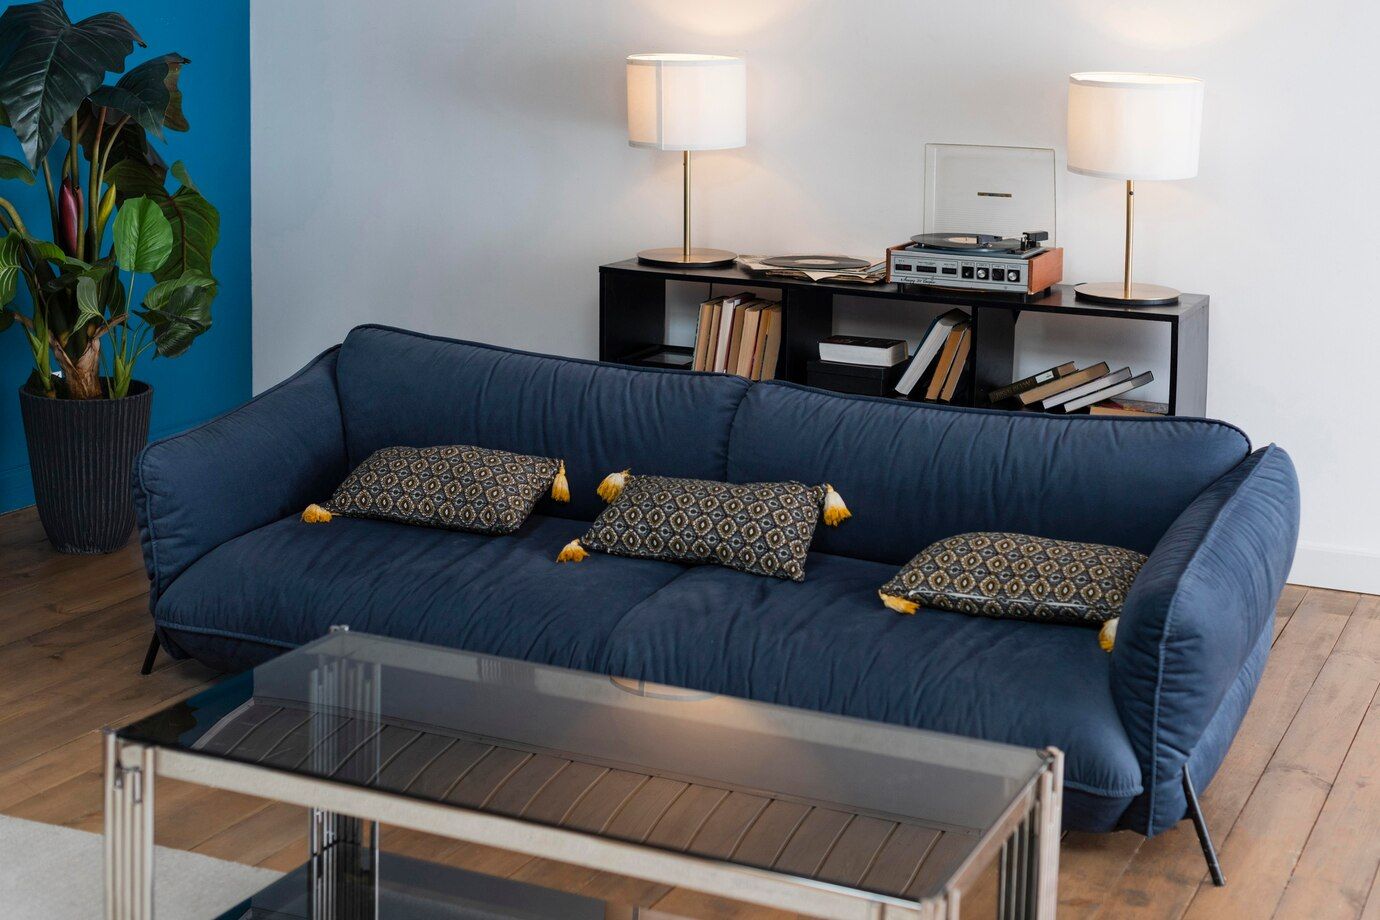 Blue couch and glass coffee table - MaxxDelivery single item movers